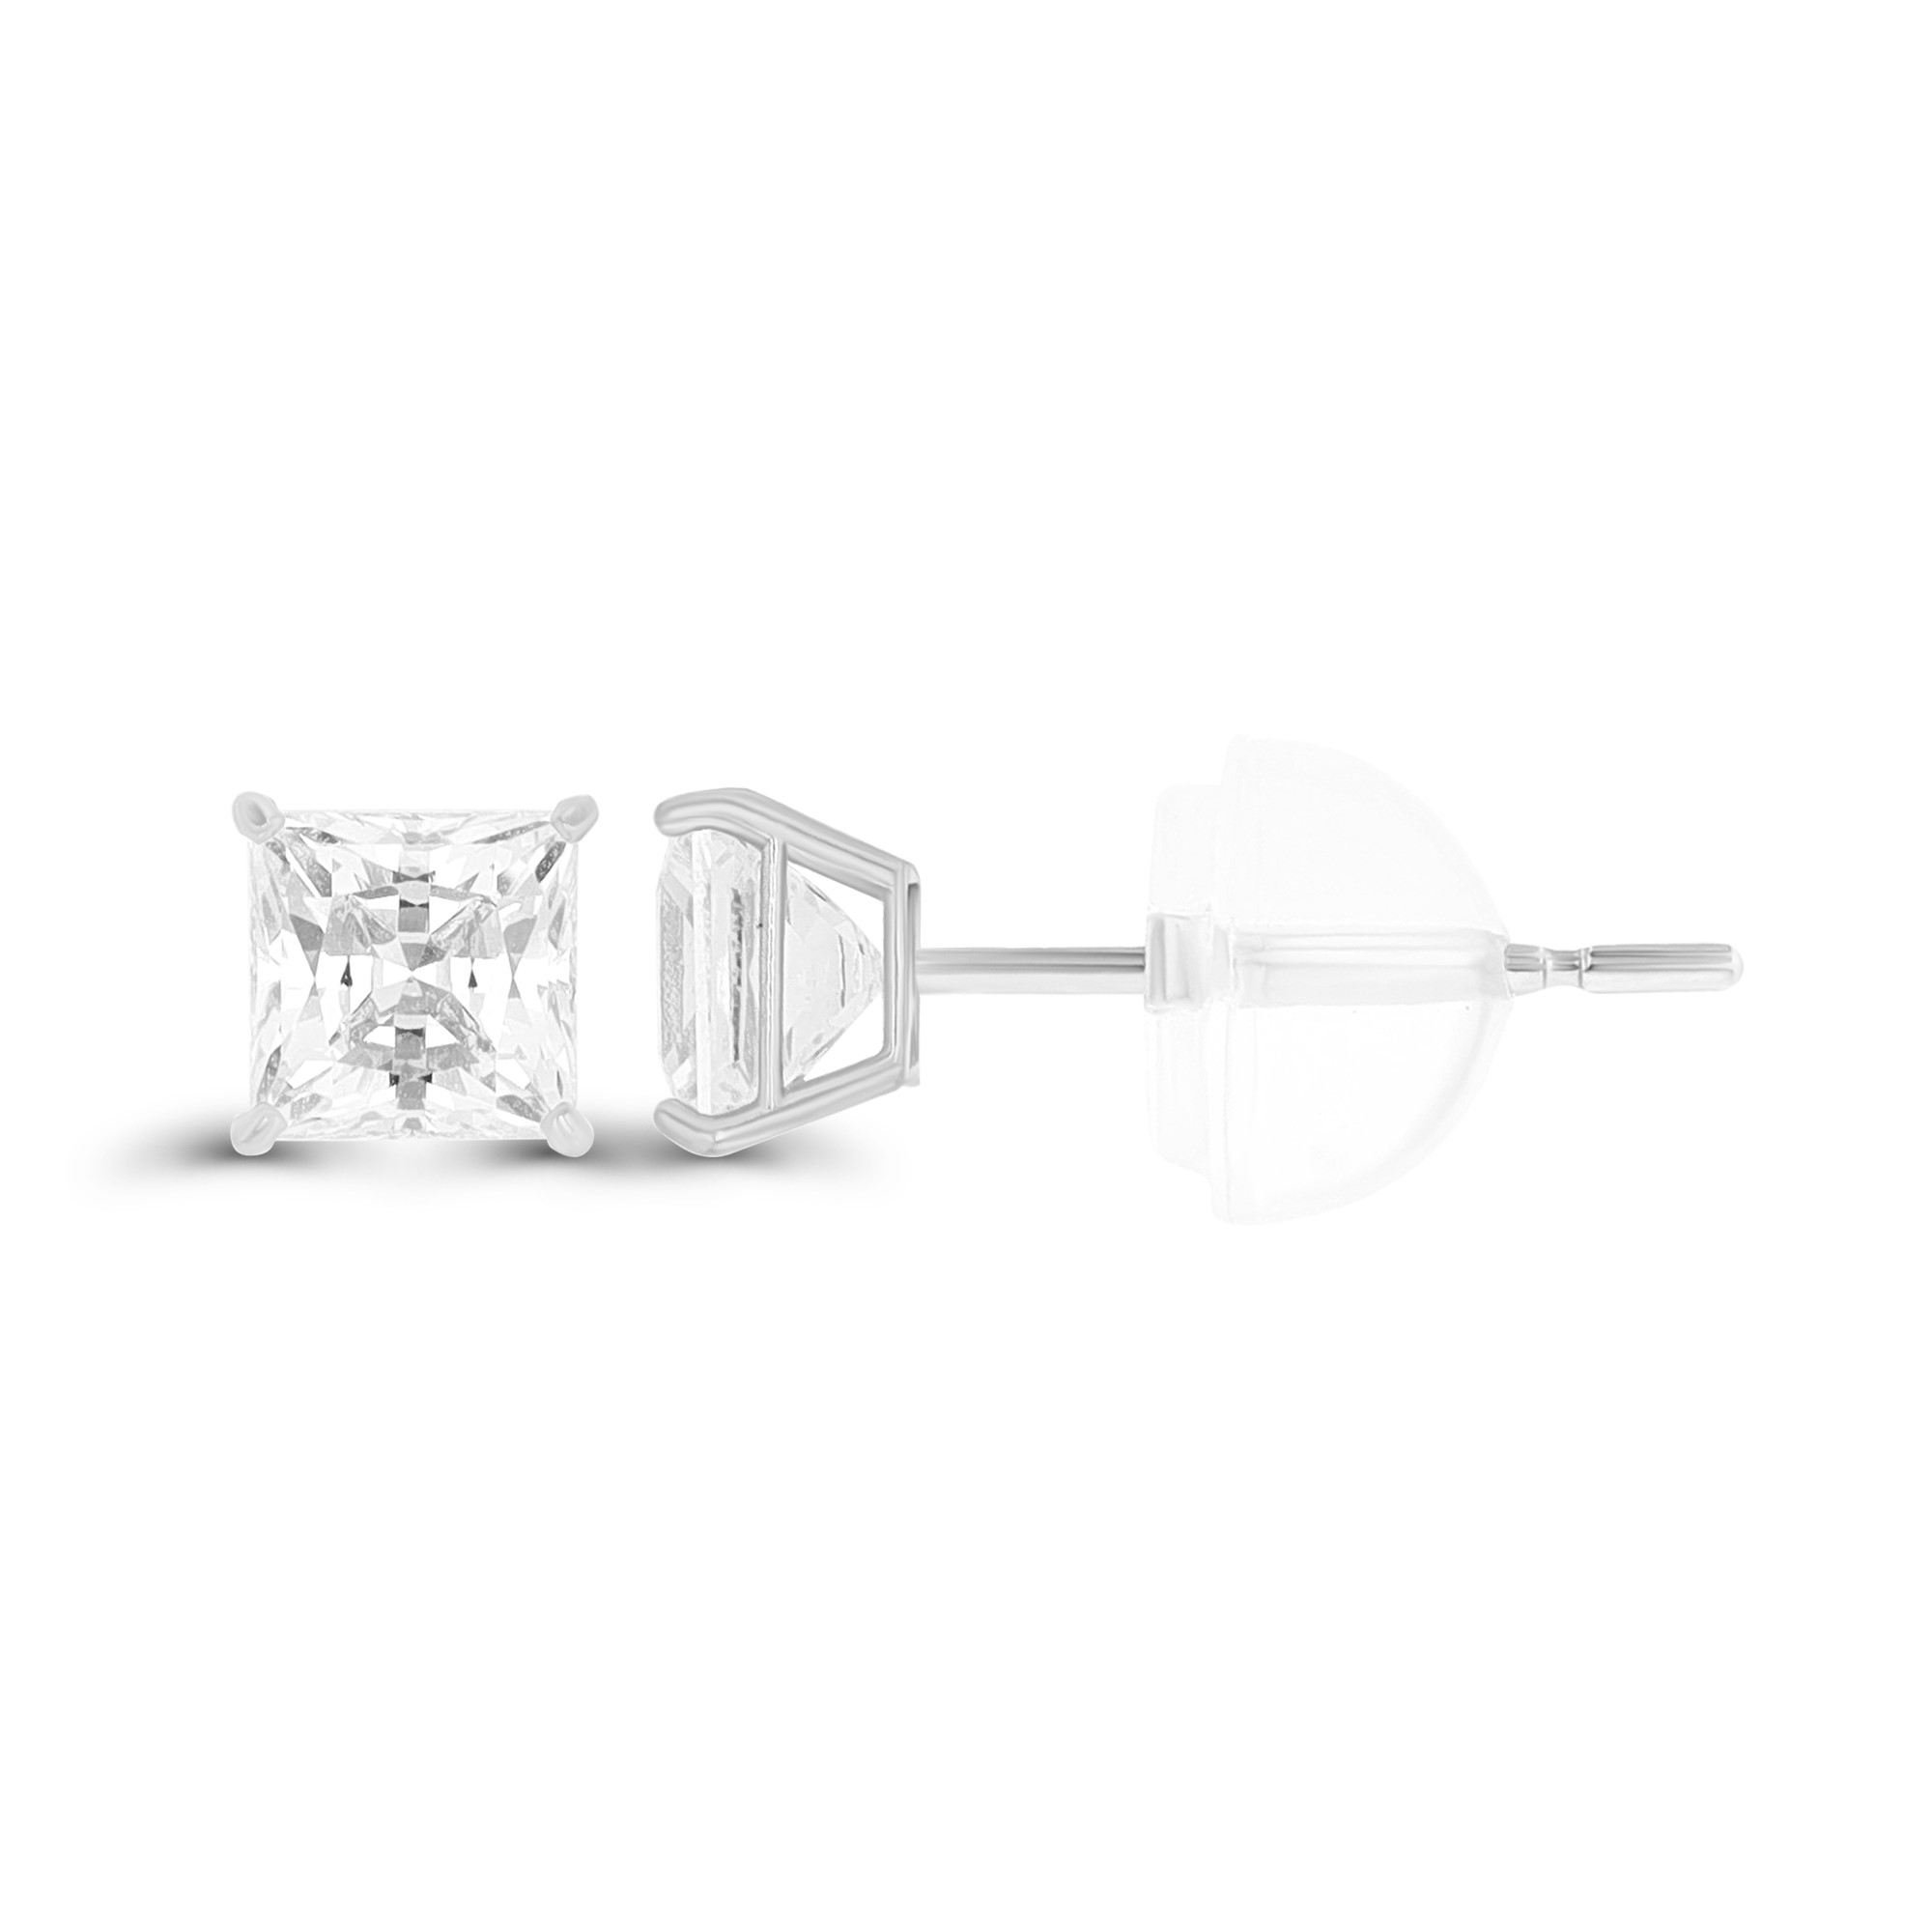 14K White Gold 4mm Sq White Swarovski Zirconia 4-Prong Cast Basket Solitaire Earring & Silicone Bubble Back